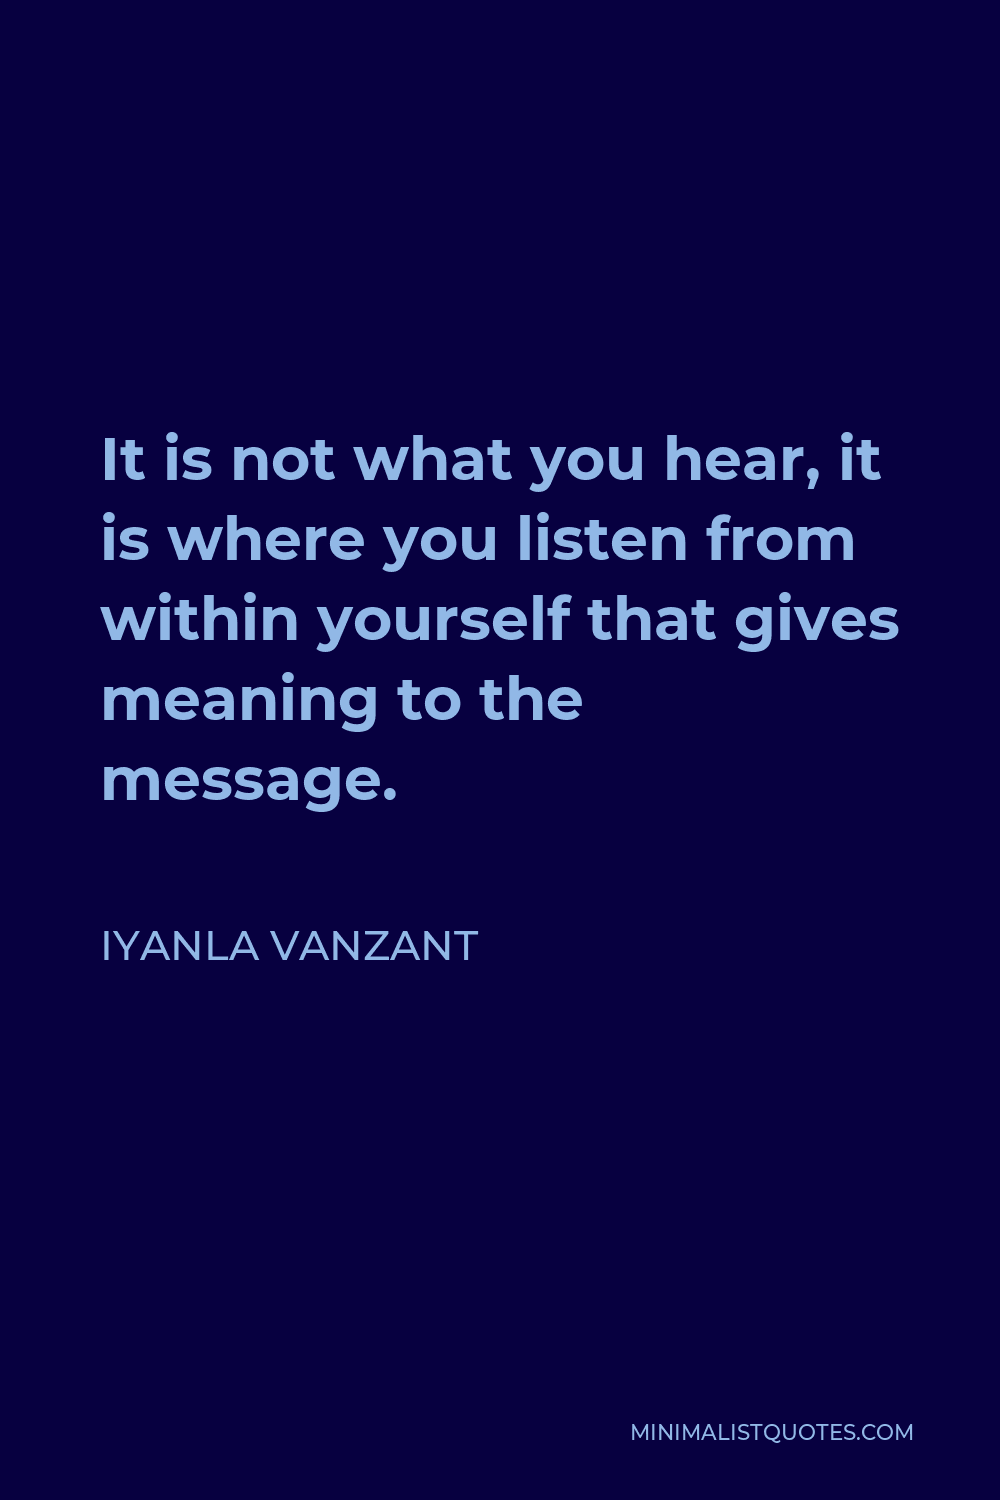 Iyanla Vanzant Quote - It is not what you hear, it is where you listen from within yourself that gives meaning to the message.